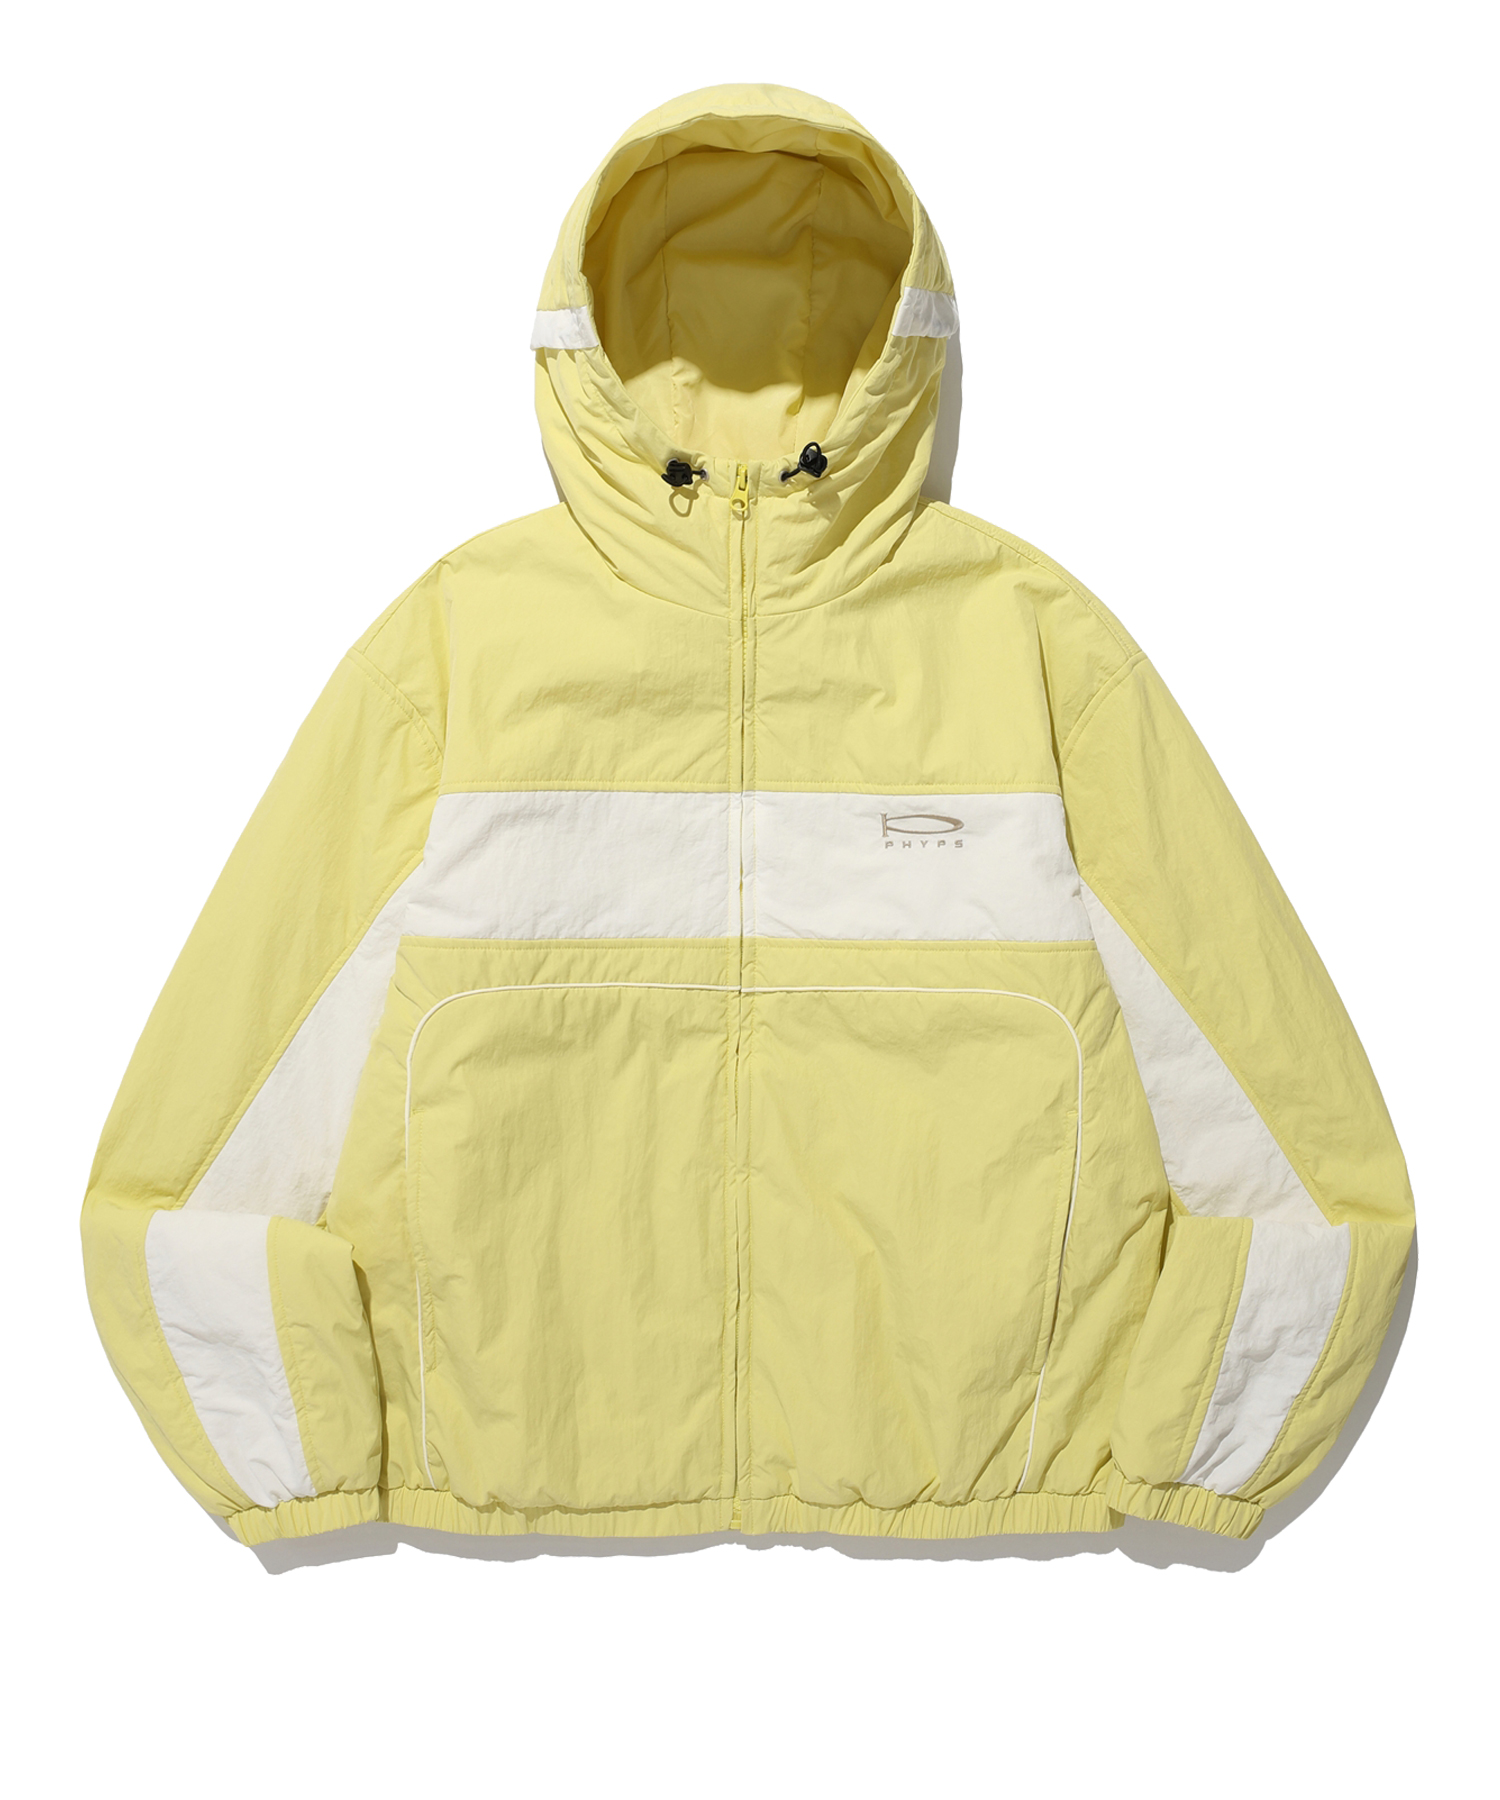 PHYPS® MOTORCYCLE CHALLENGER HOODIE JACKET LIME